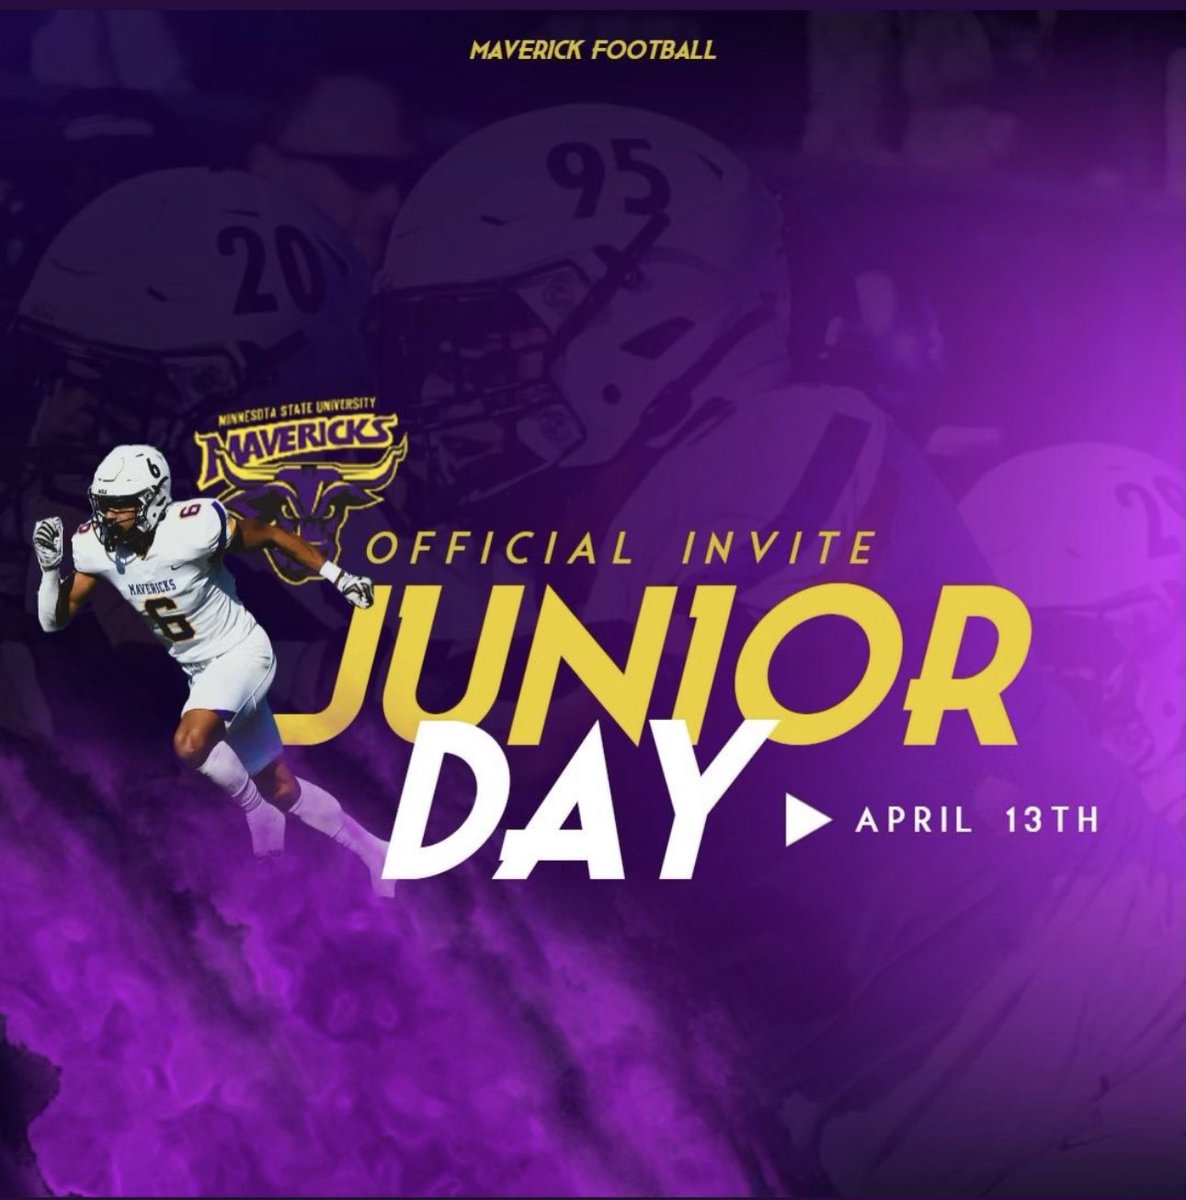 Thank you @CoachBowen98 and @Todd_Taylor28 for the junior day invite!!